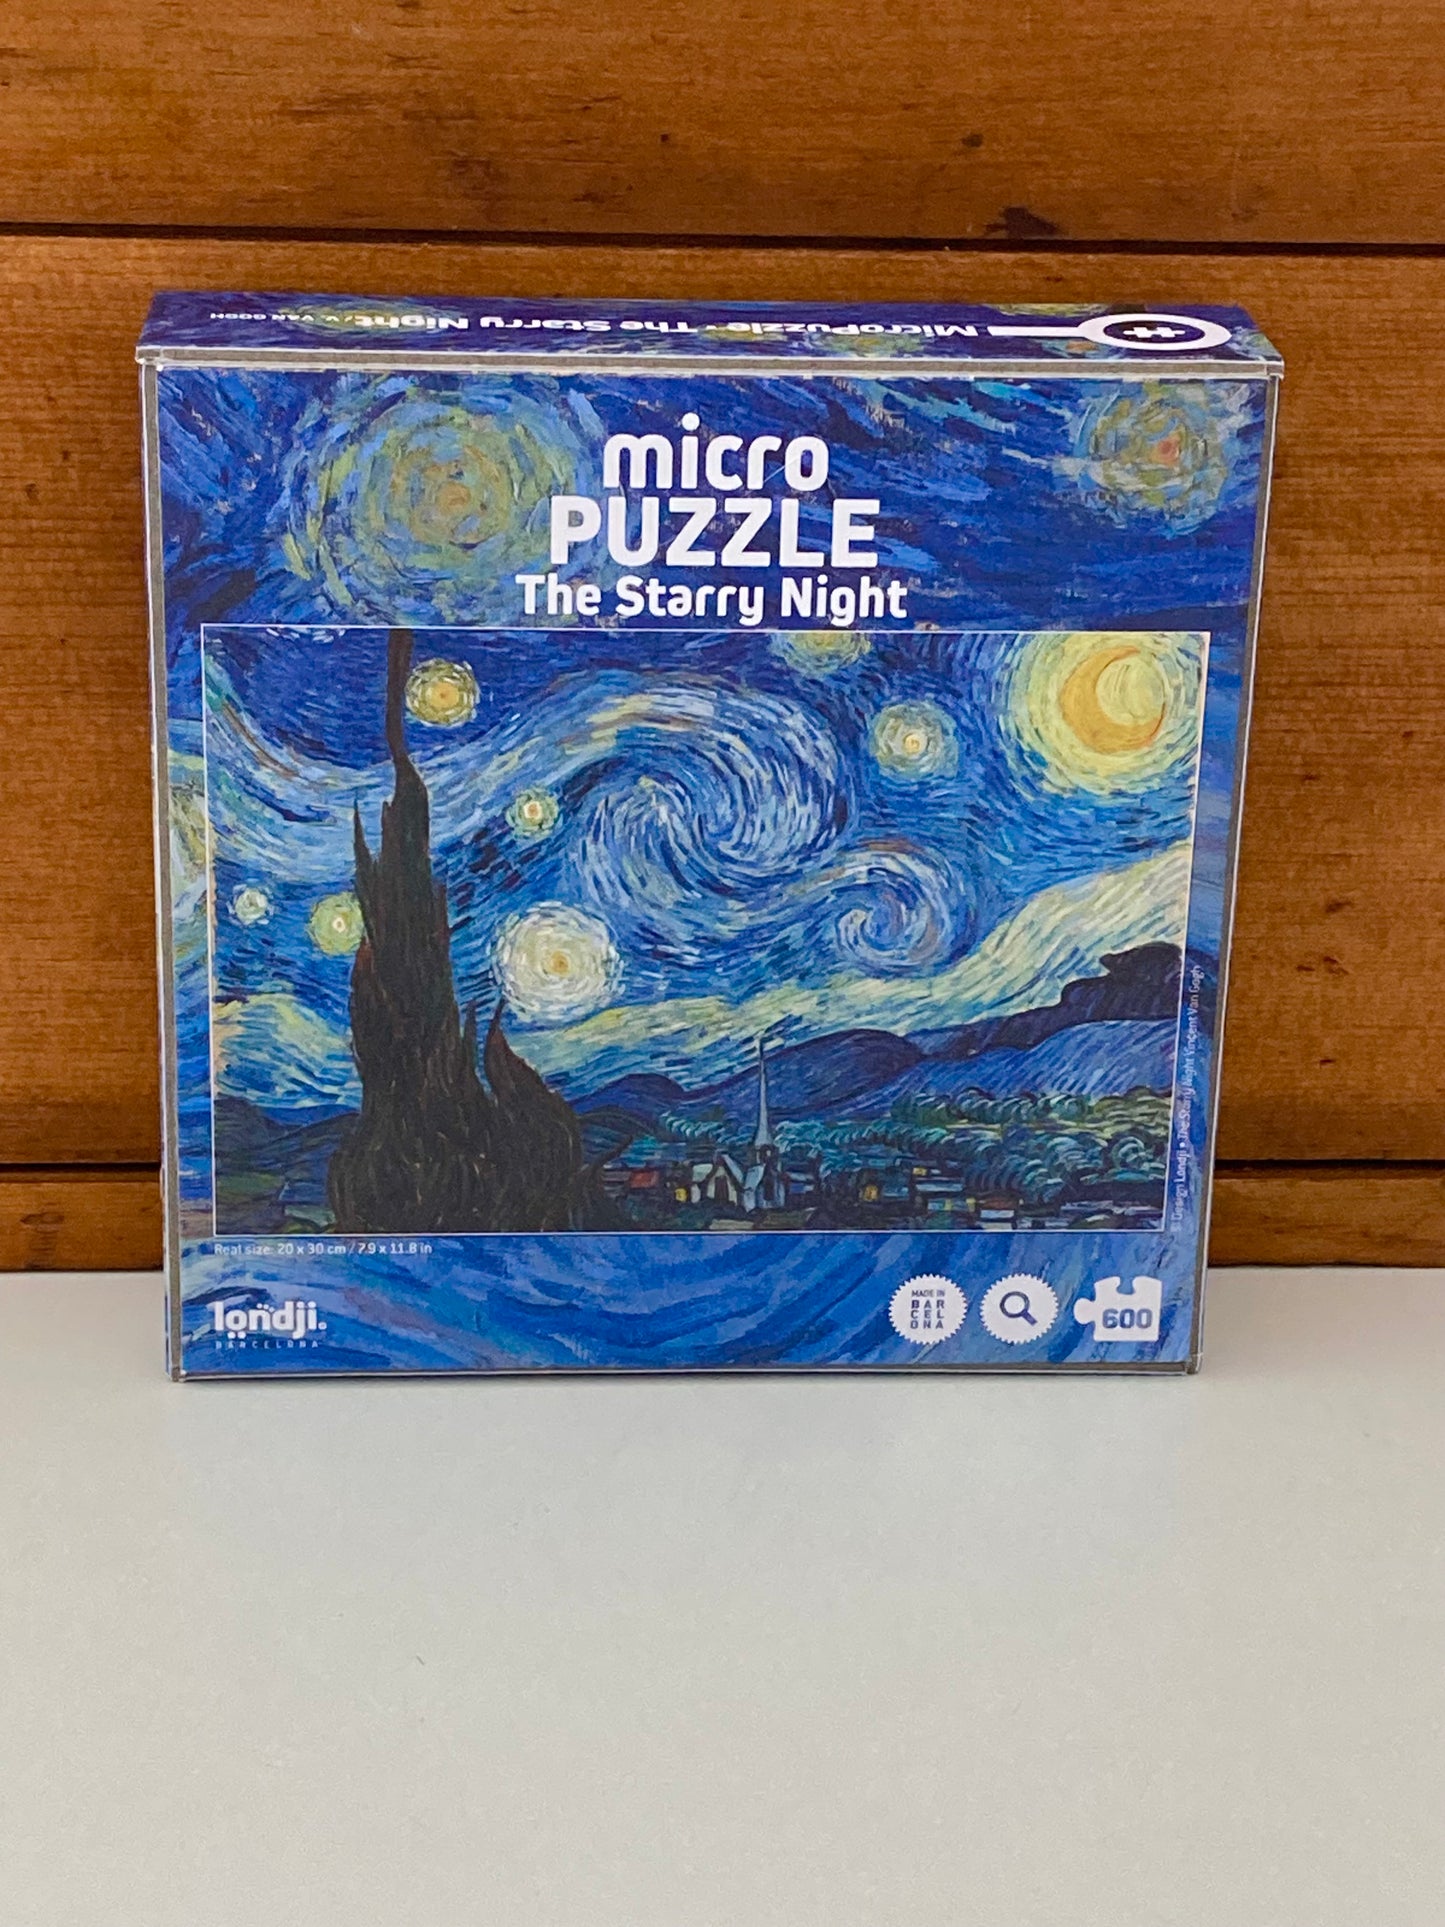 Puzzle - Van Gogh's THE STARRY NIGHT (Micro puzzle) 600 pieces!